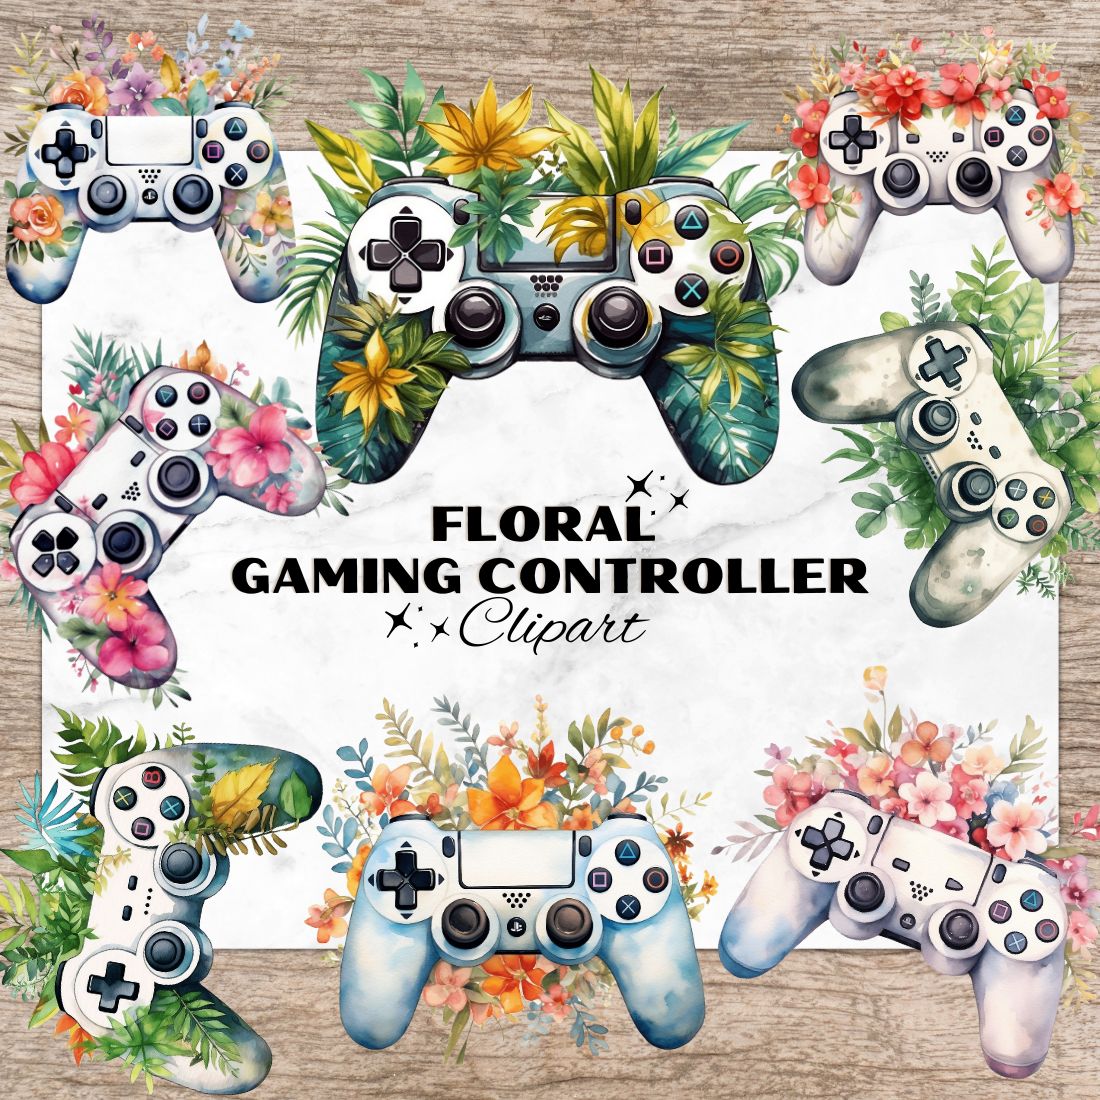 16 Floral Gaming Controller PNG, Gaming Watercolor Clipart, Transparent PNG, Digital Paper Craft, Watercolor Clipart for Scrapbook, Invitation, Wall Art, T-Shirt Design cover image.